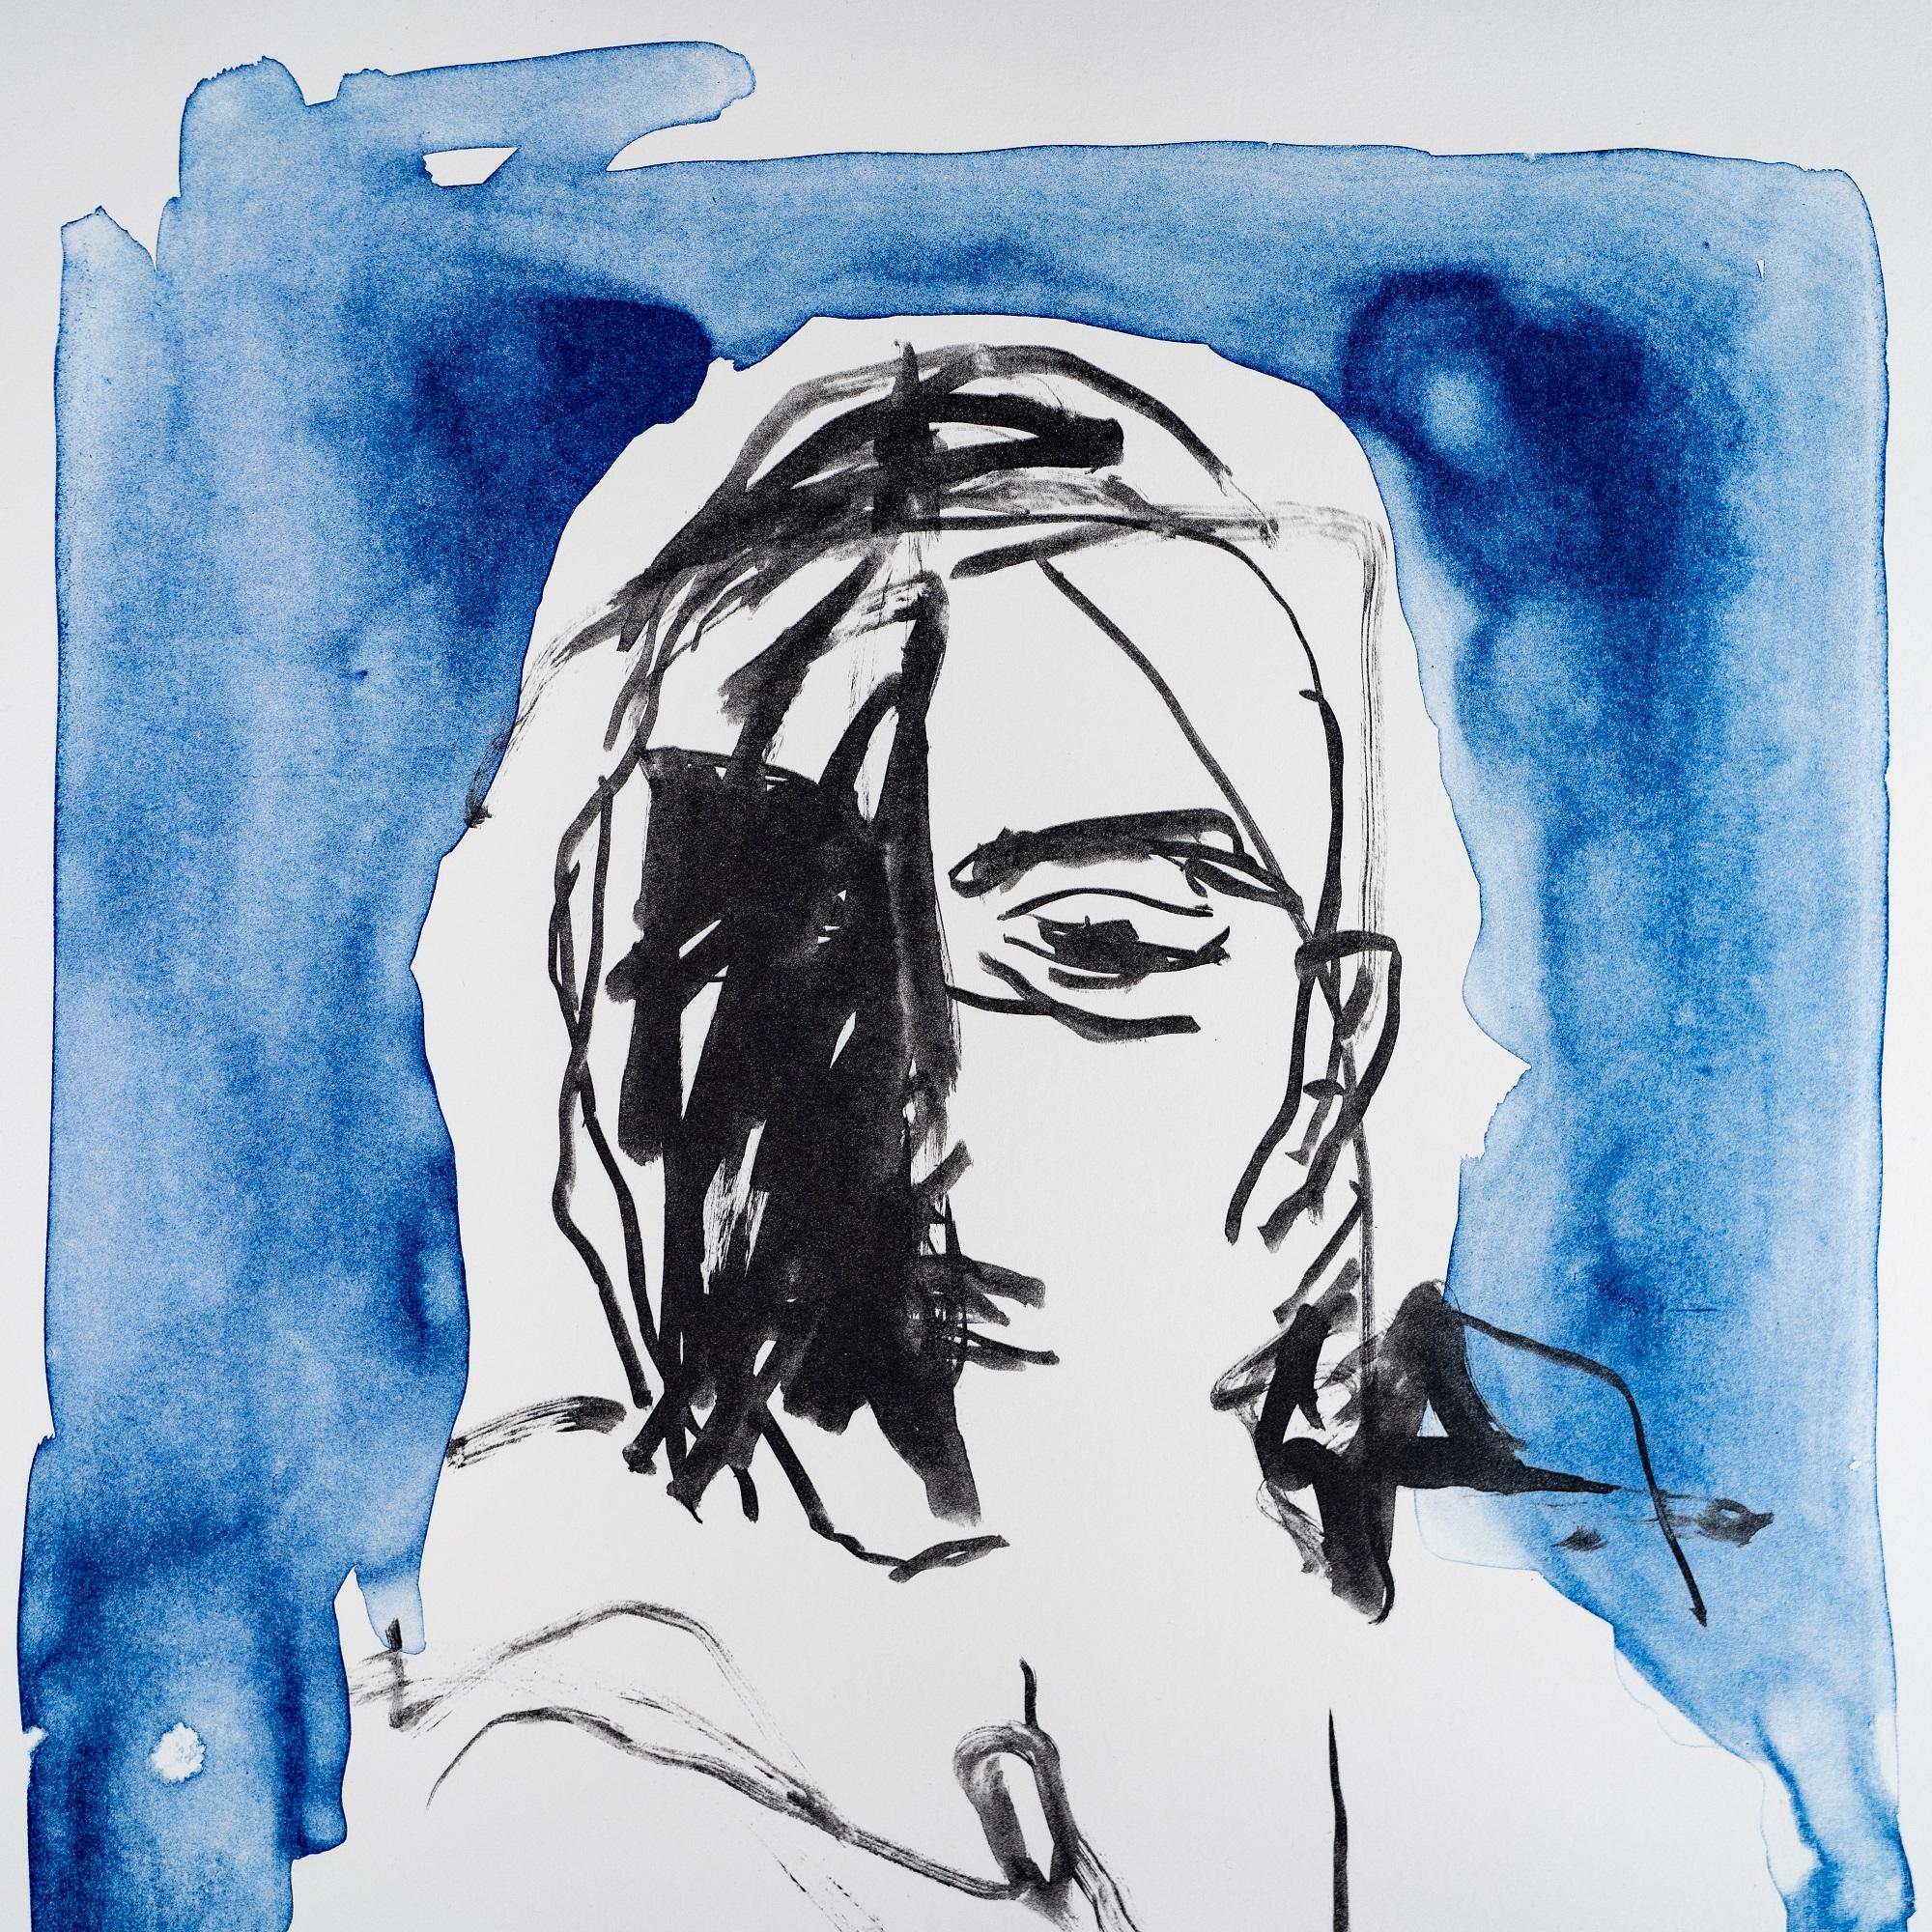 These Feelings Were True - Emin, Contemporary, YBAs, Lithograph, Portrait, Blue - Print by Tracey Emin